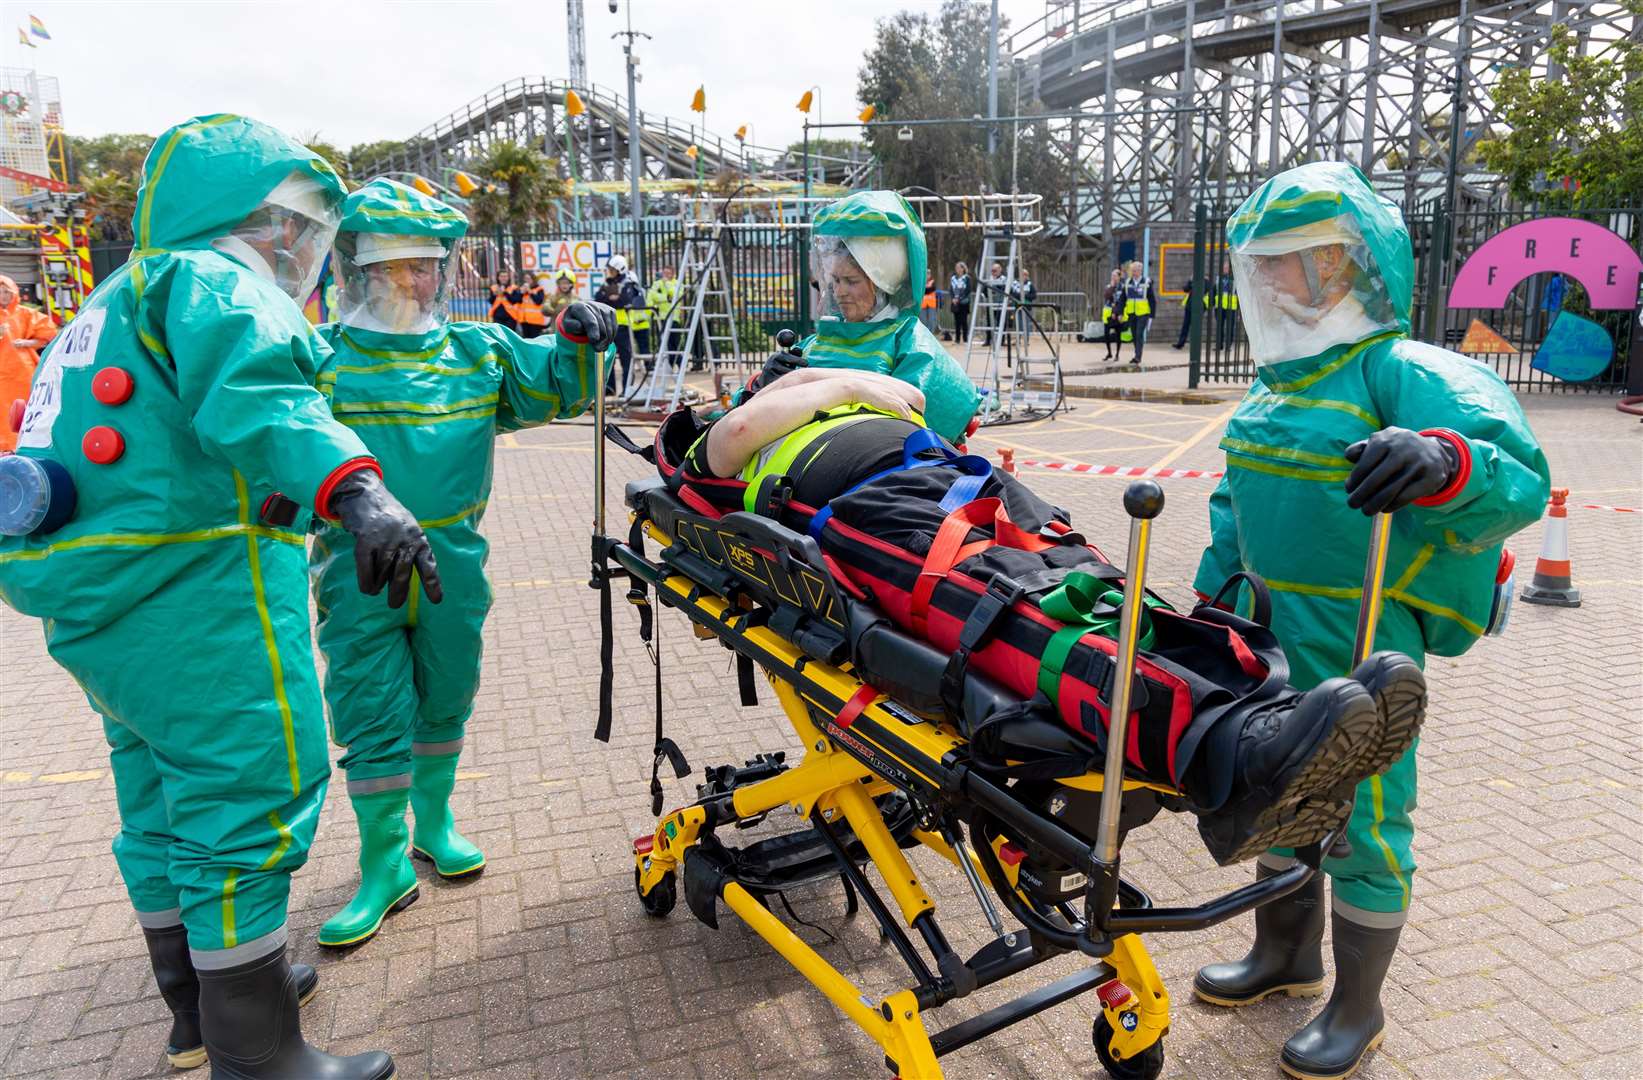 A huge chemical attack was staged at Dreamland. Pics: KFRS